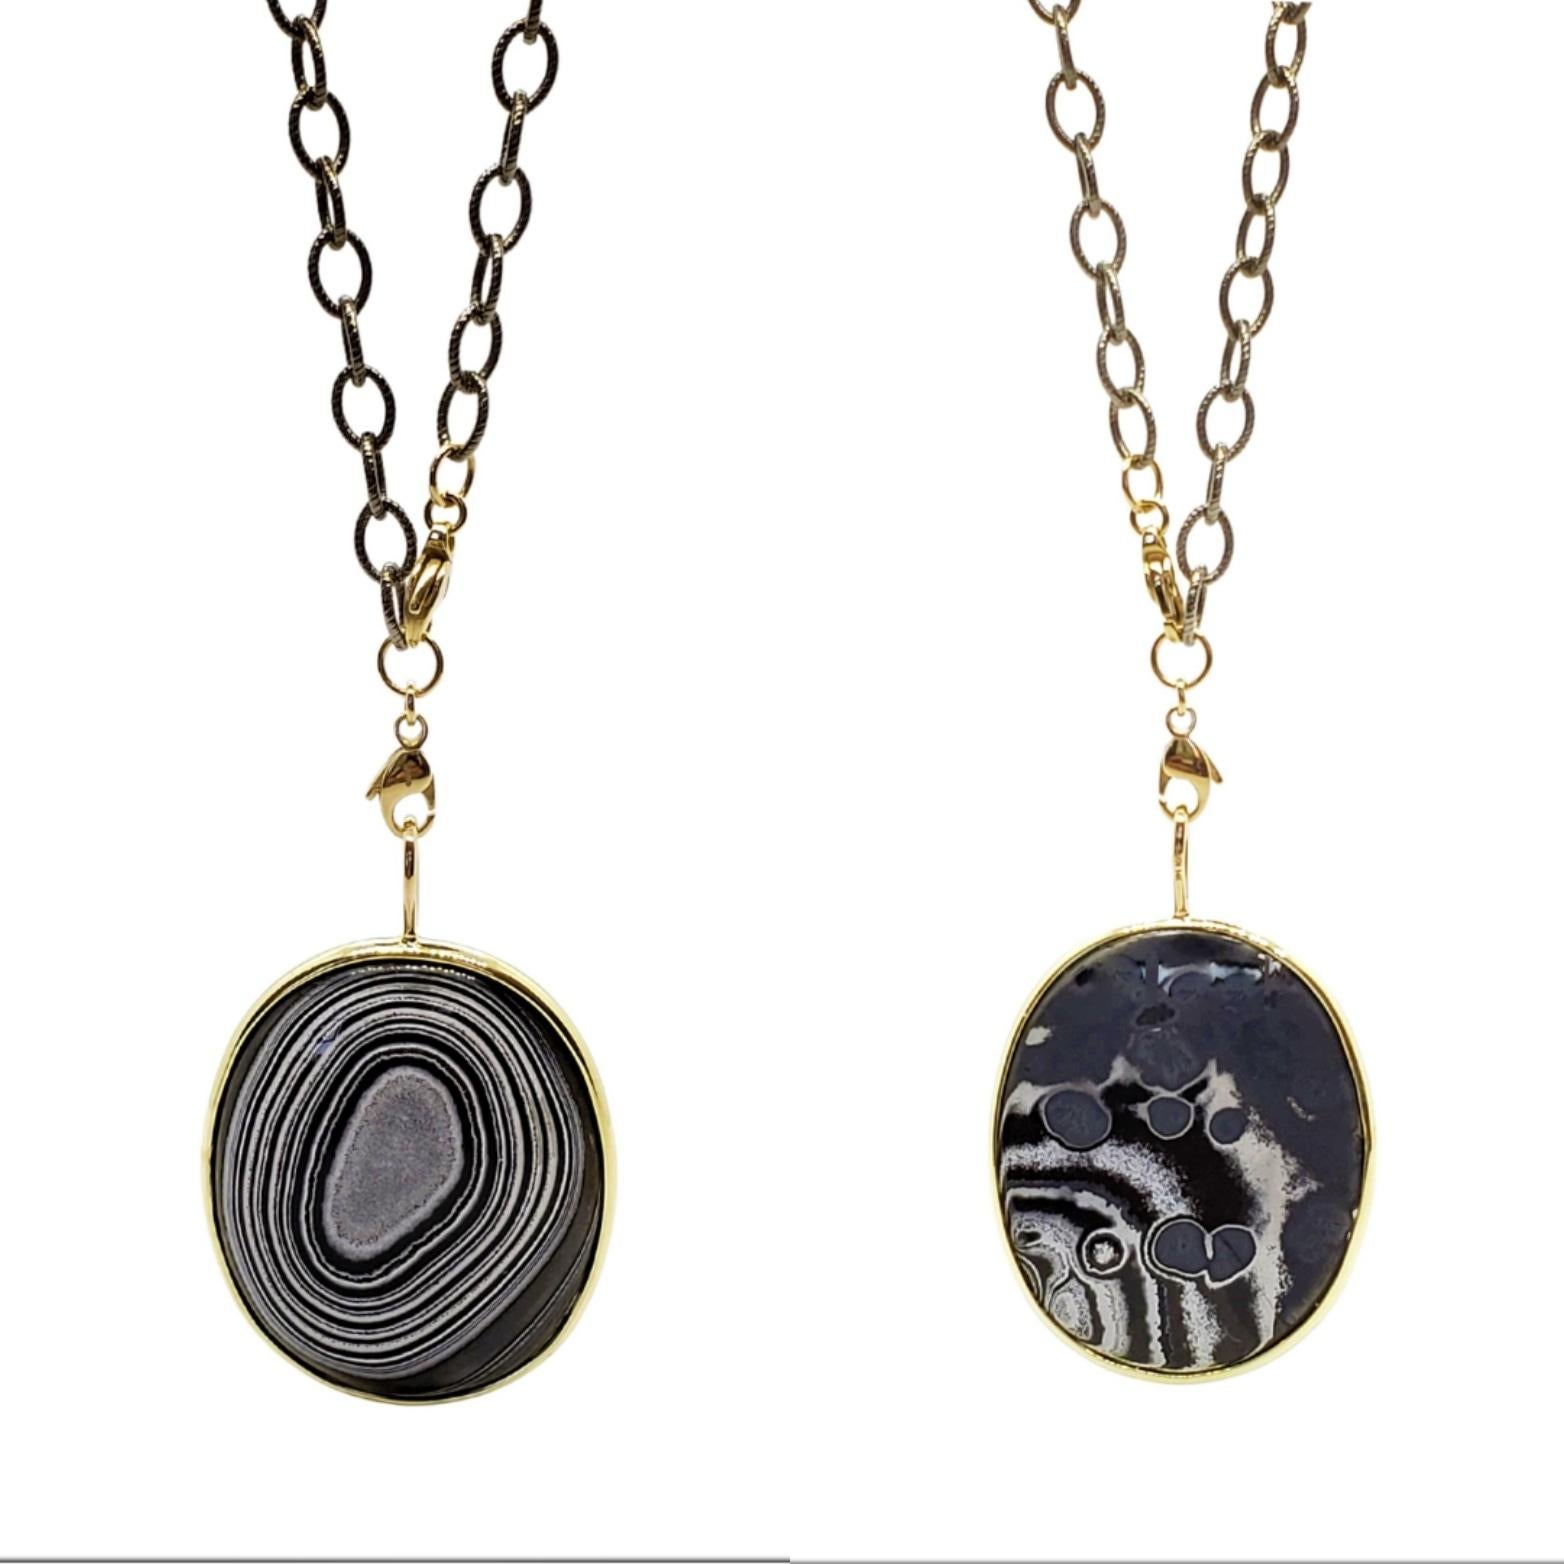 Edgy bold round Oval gemstone Necklace in 14K yellow gold. Mexican Psilomelane has an optical illusion aspect in the concentric pattern in Black and White. Every piece is a One of A Kind.
We handmake the bezel for each stone which is reversible. Our